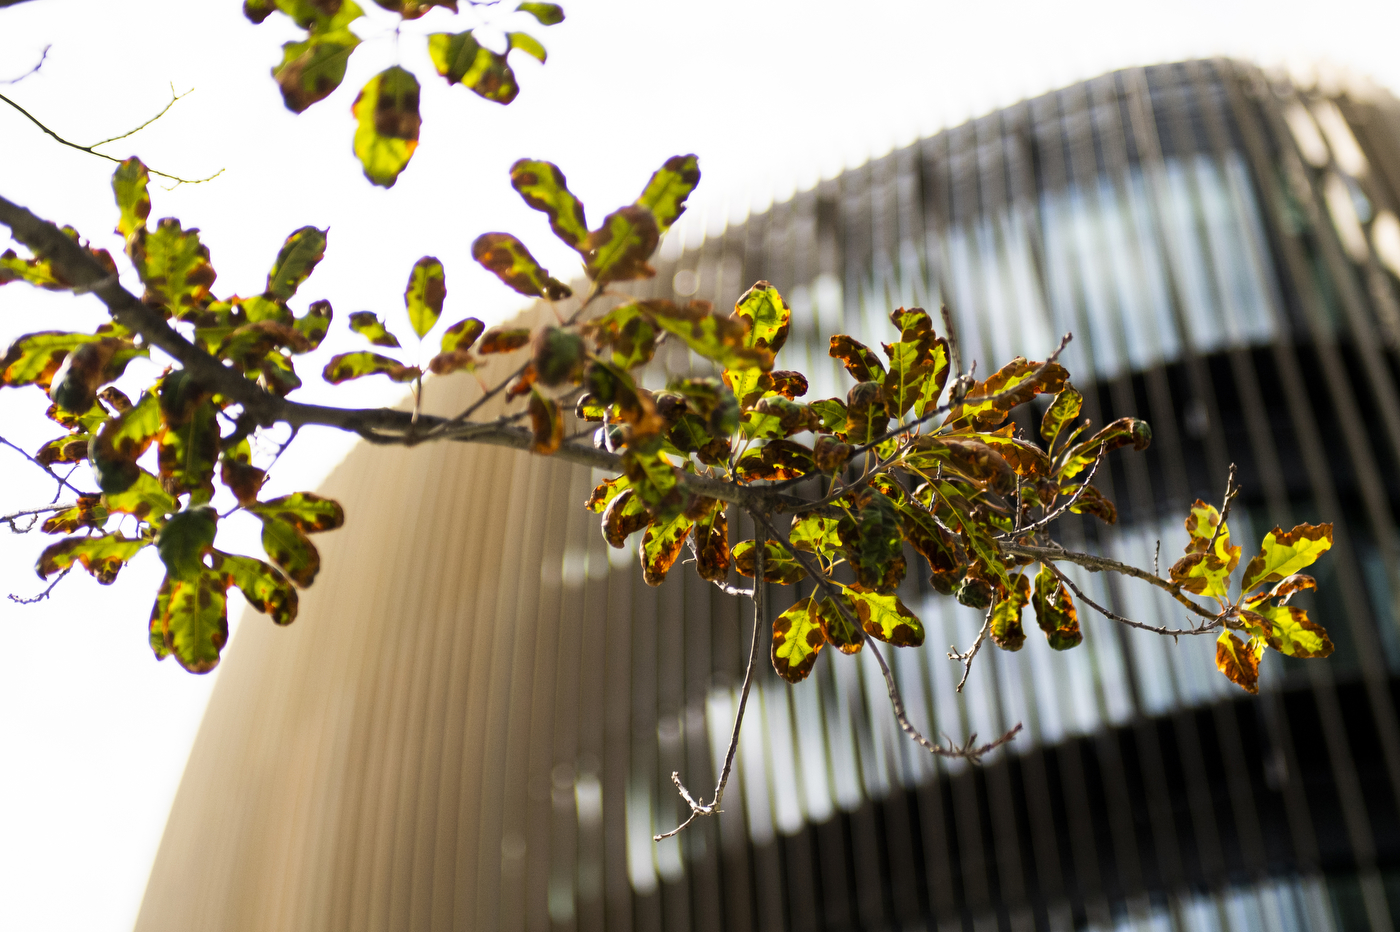 Leaves of a tree branch that are browning due to drought conditions in Massachusetts are shown against the ISEC building on Northeastern University's Boston campus.